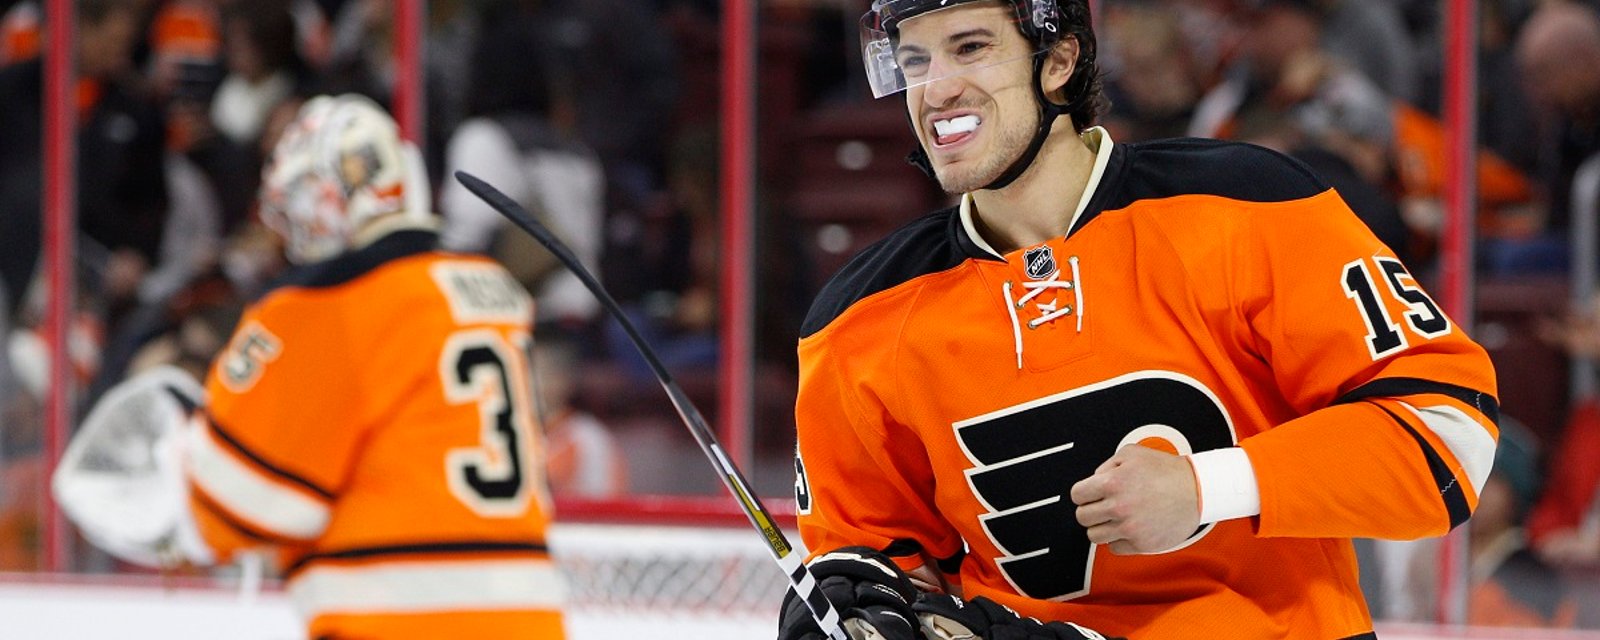 Report: Flyers lose one of their top defensemen for over a month.